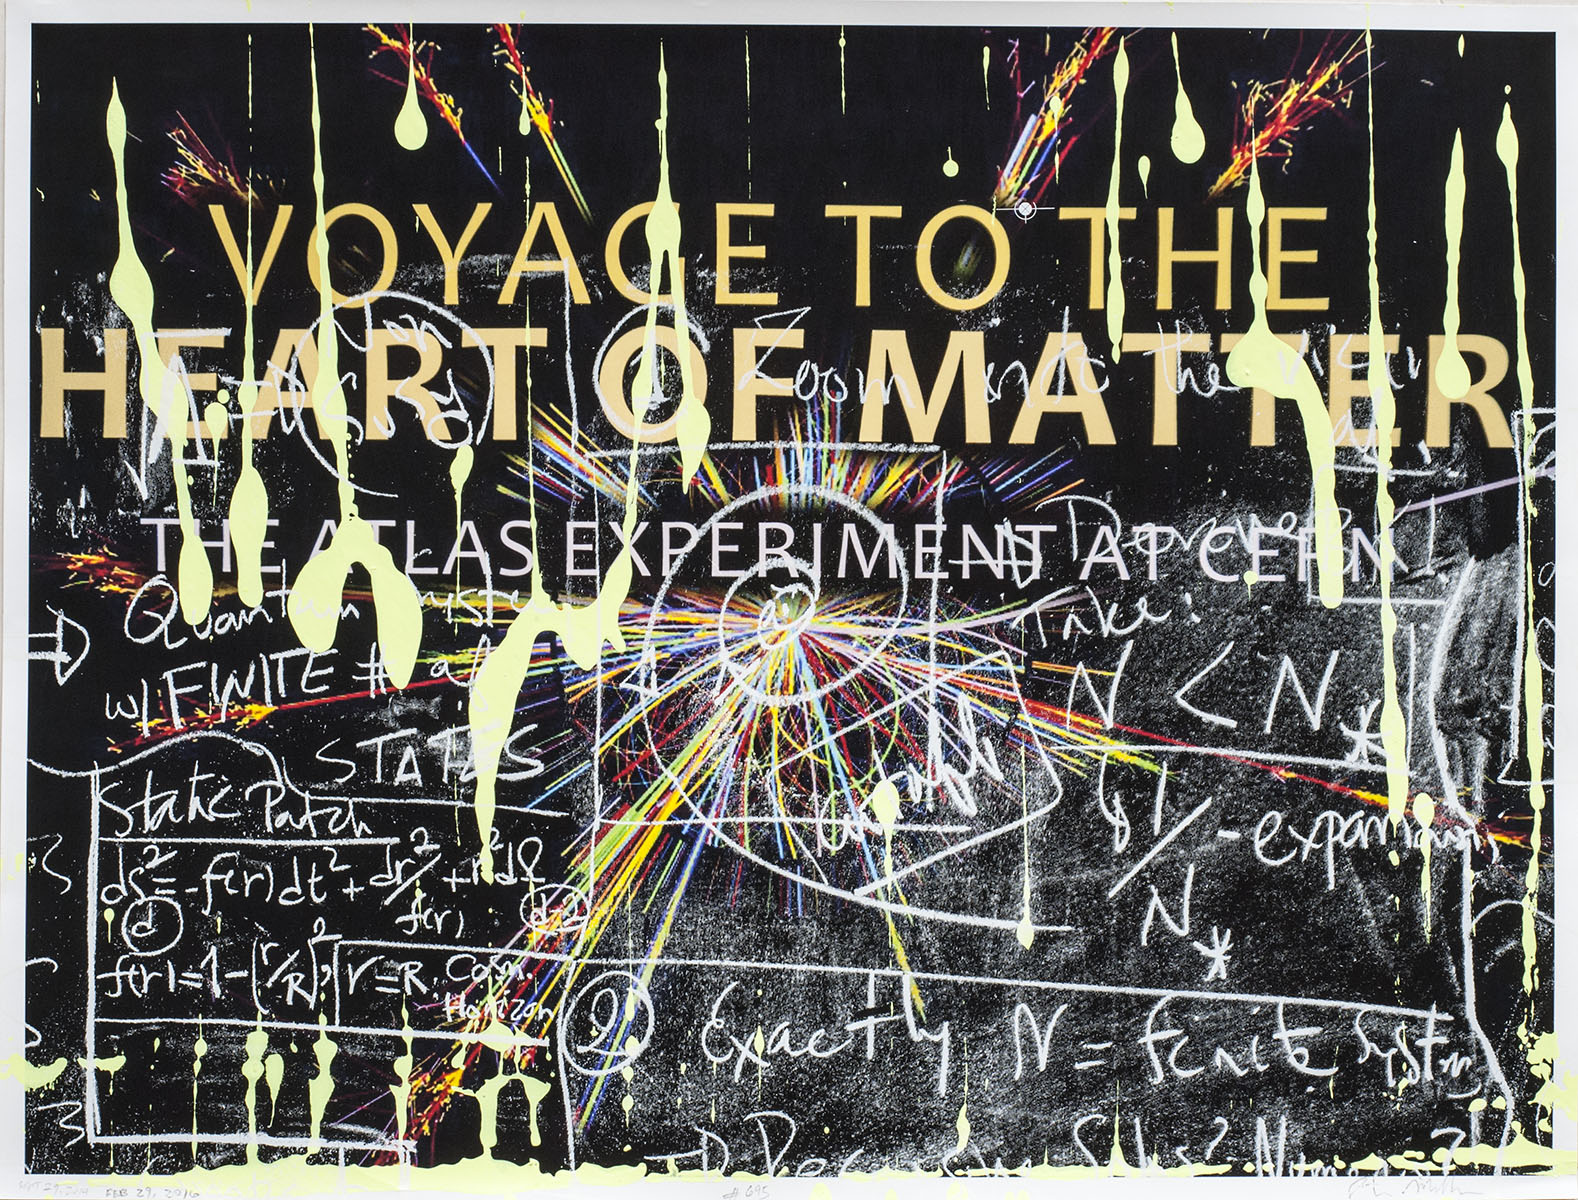 The source material: 2016 inkjet, enamel and silkscreen on paper “Voyage to the Heart of the Matter” by Steve Miller